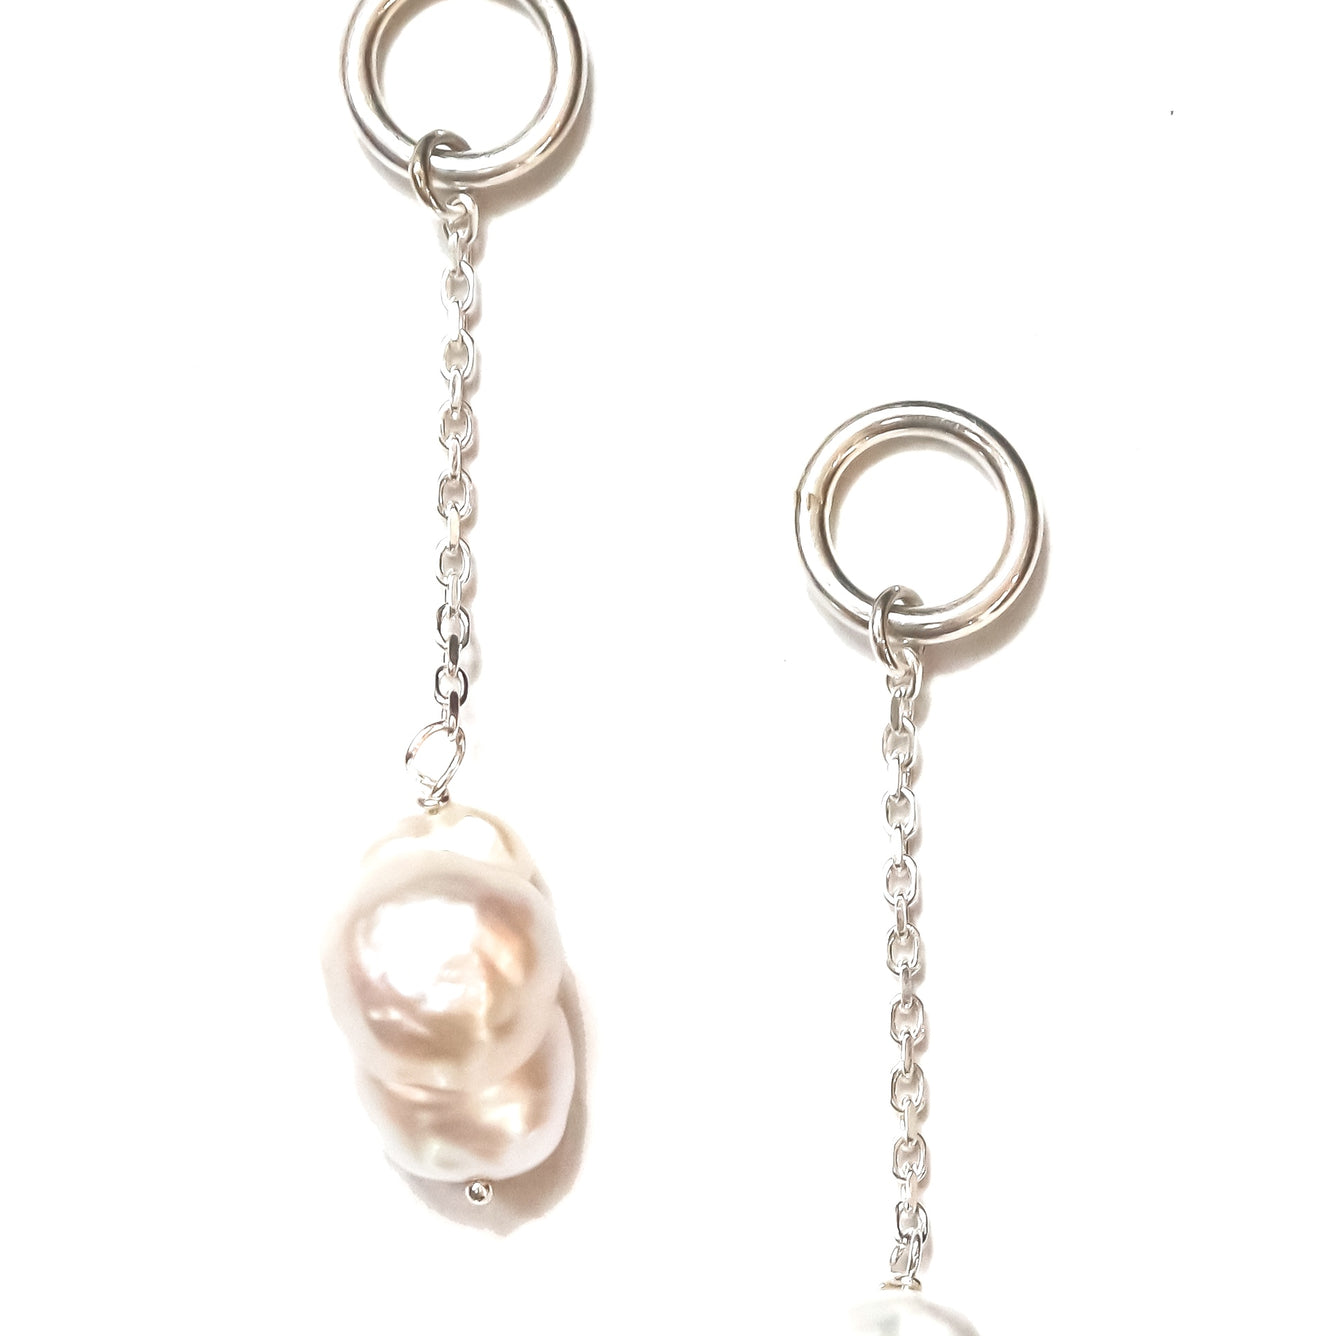 Freshwater Pearl Drops by Paul Eaton Silversmith